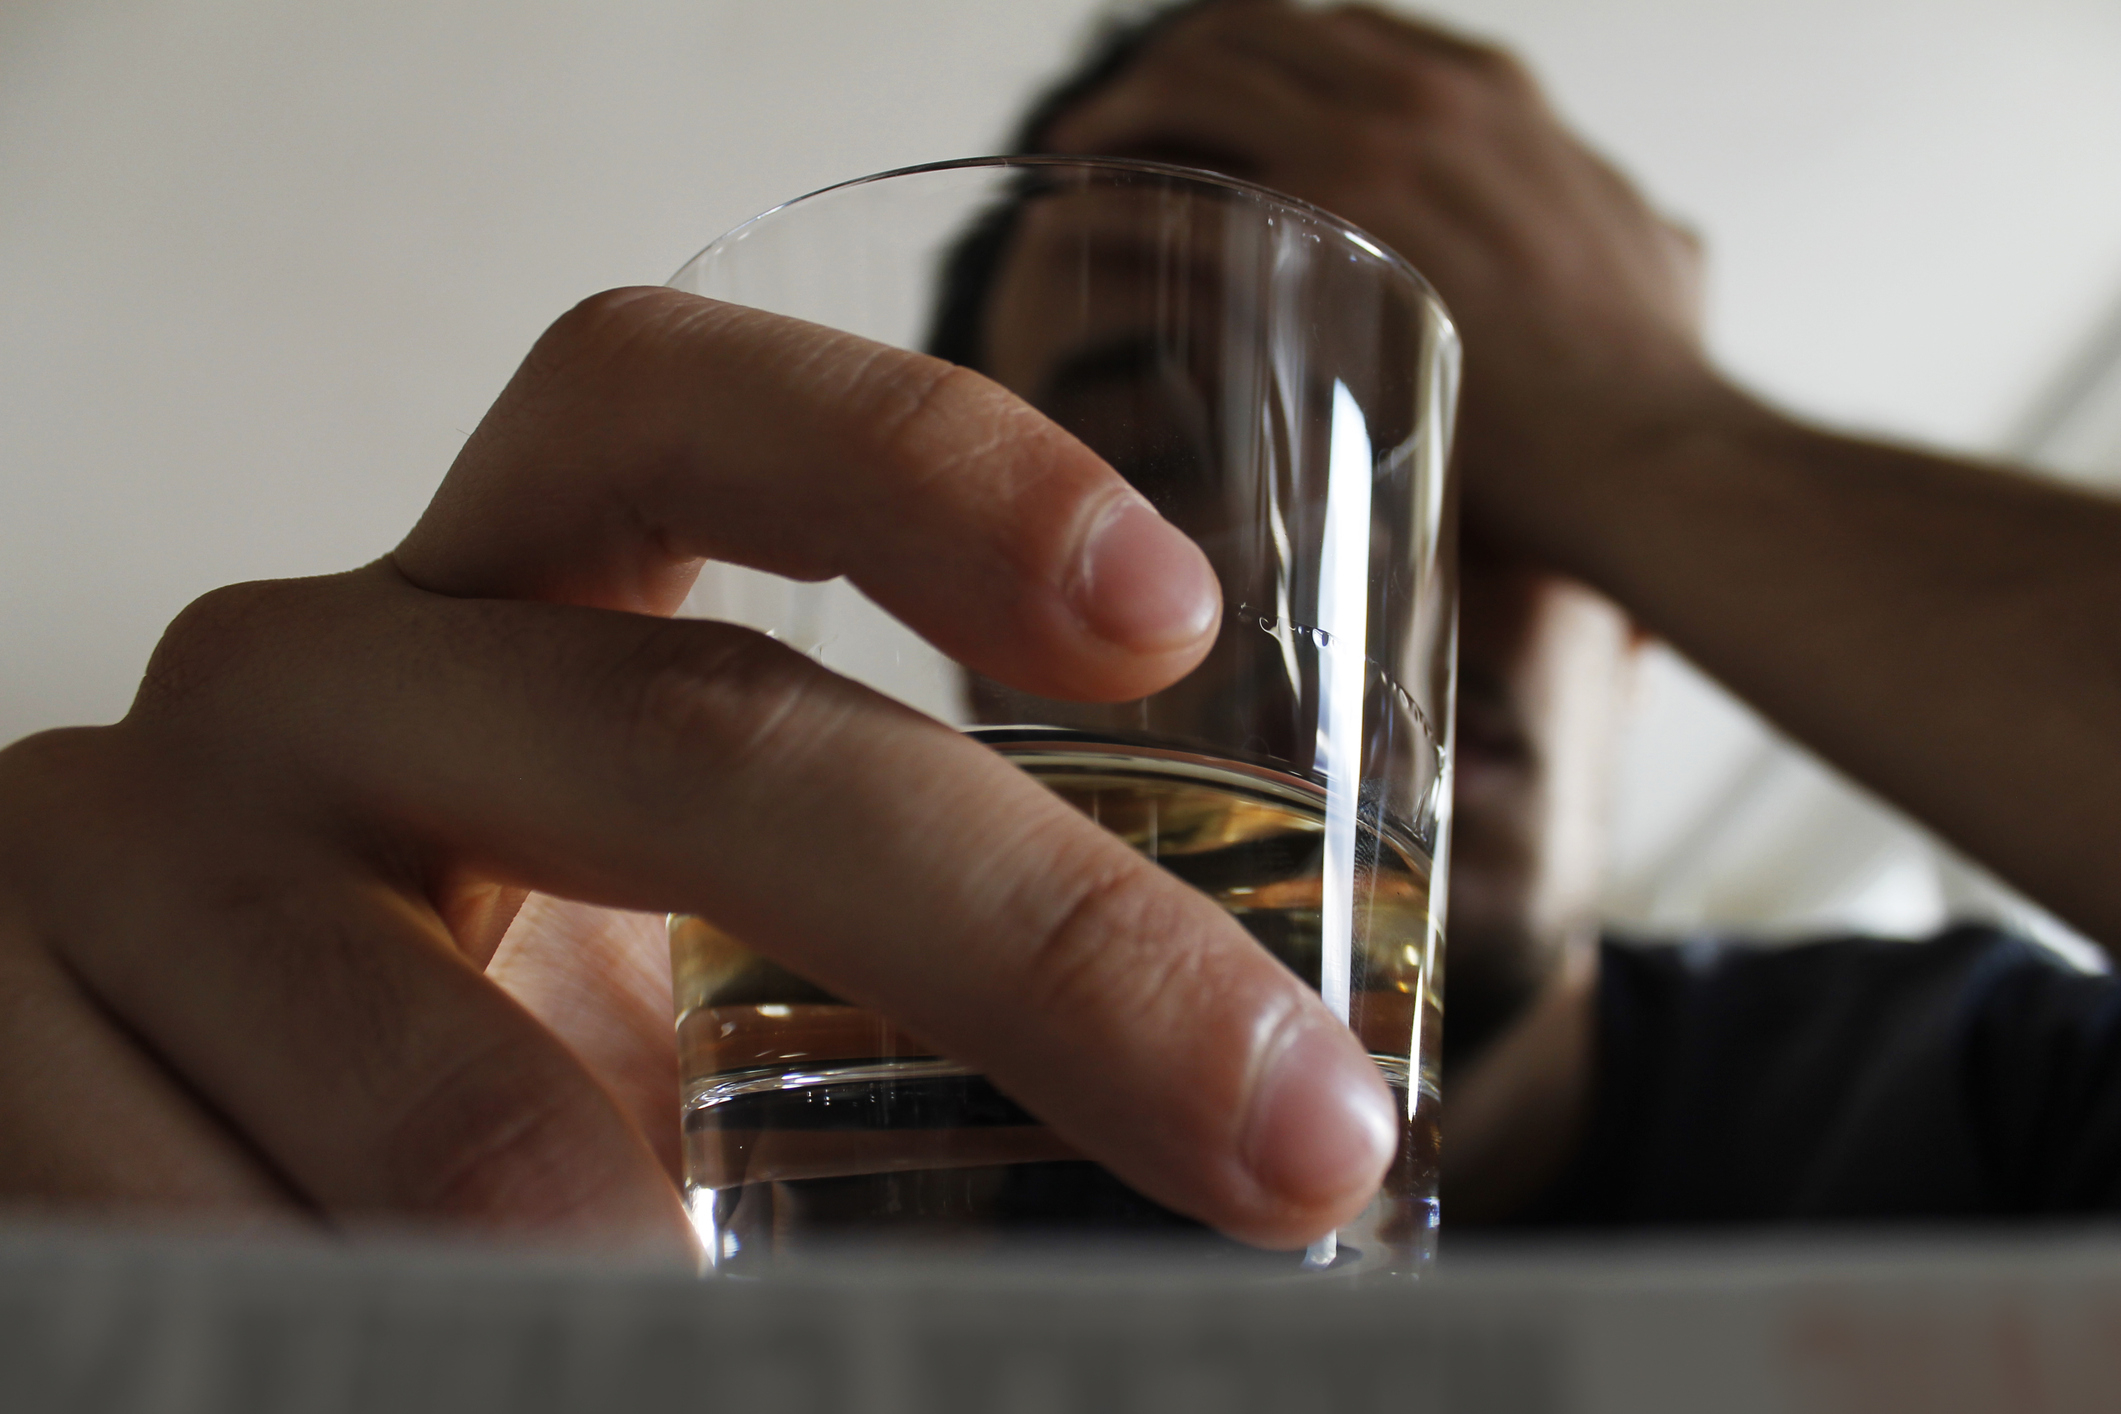 Close-up of a glass of liquor held by someone with their hand on their face